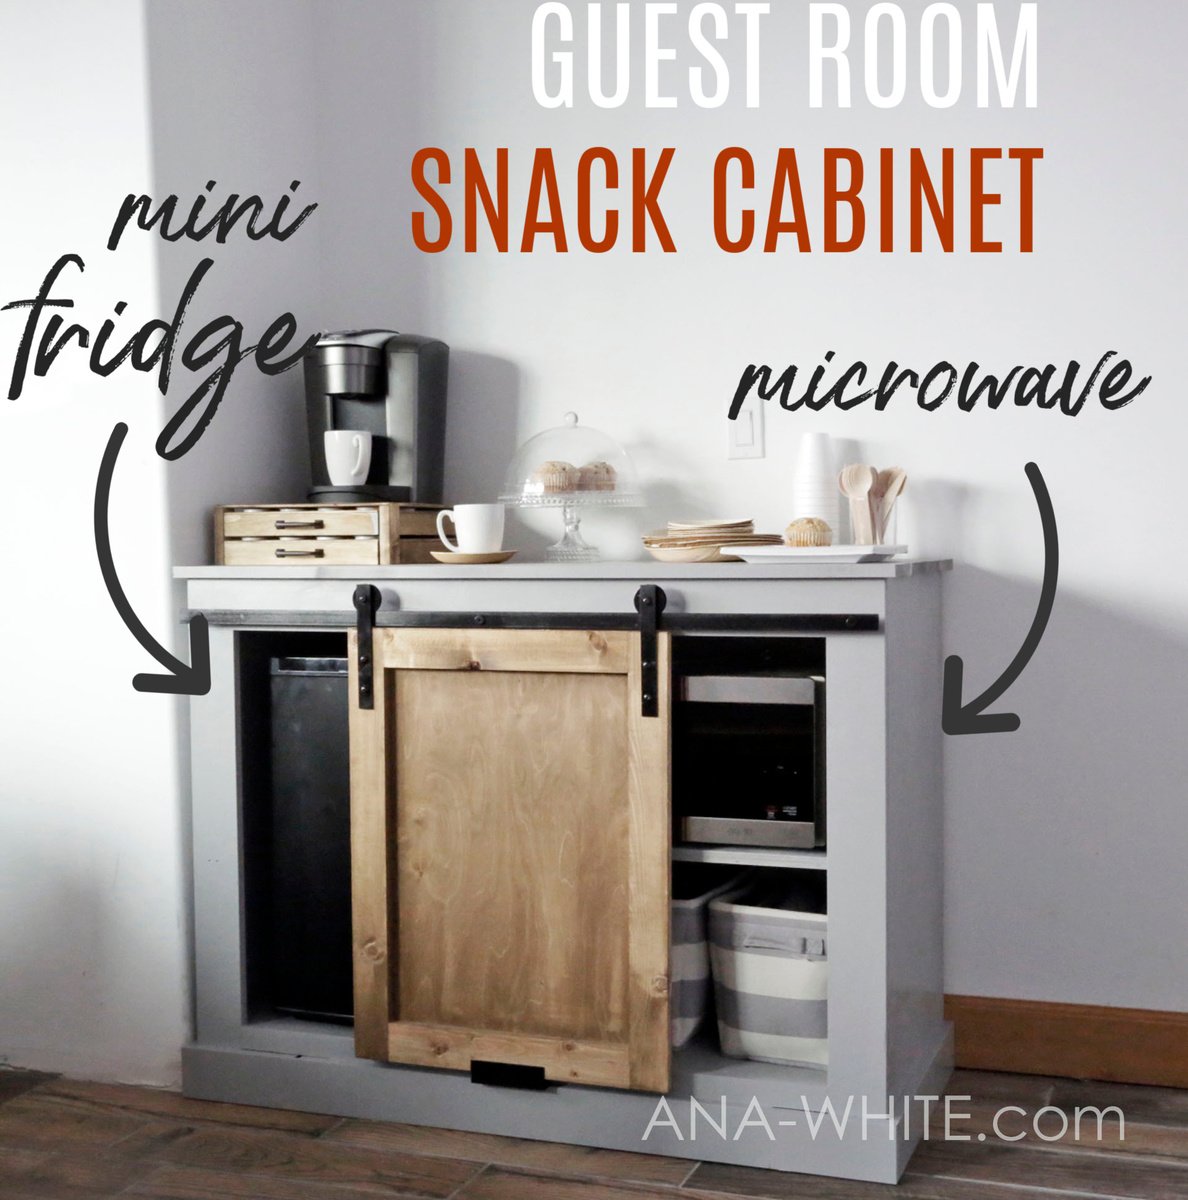 https://www.ana-white.com/sites/default/files/inline-images/GUEST%20ROOM%20SNACK%20CABINET.jpeg